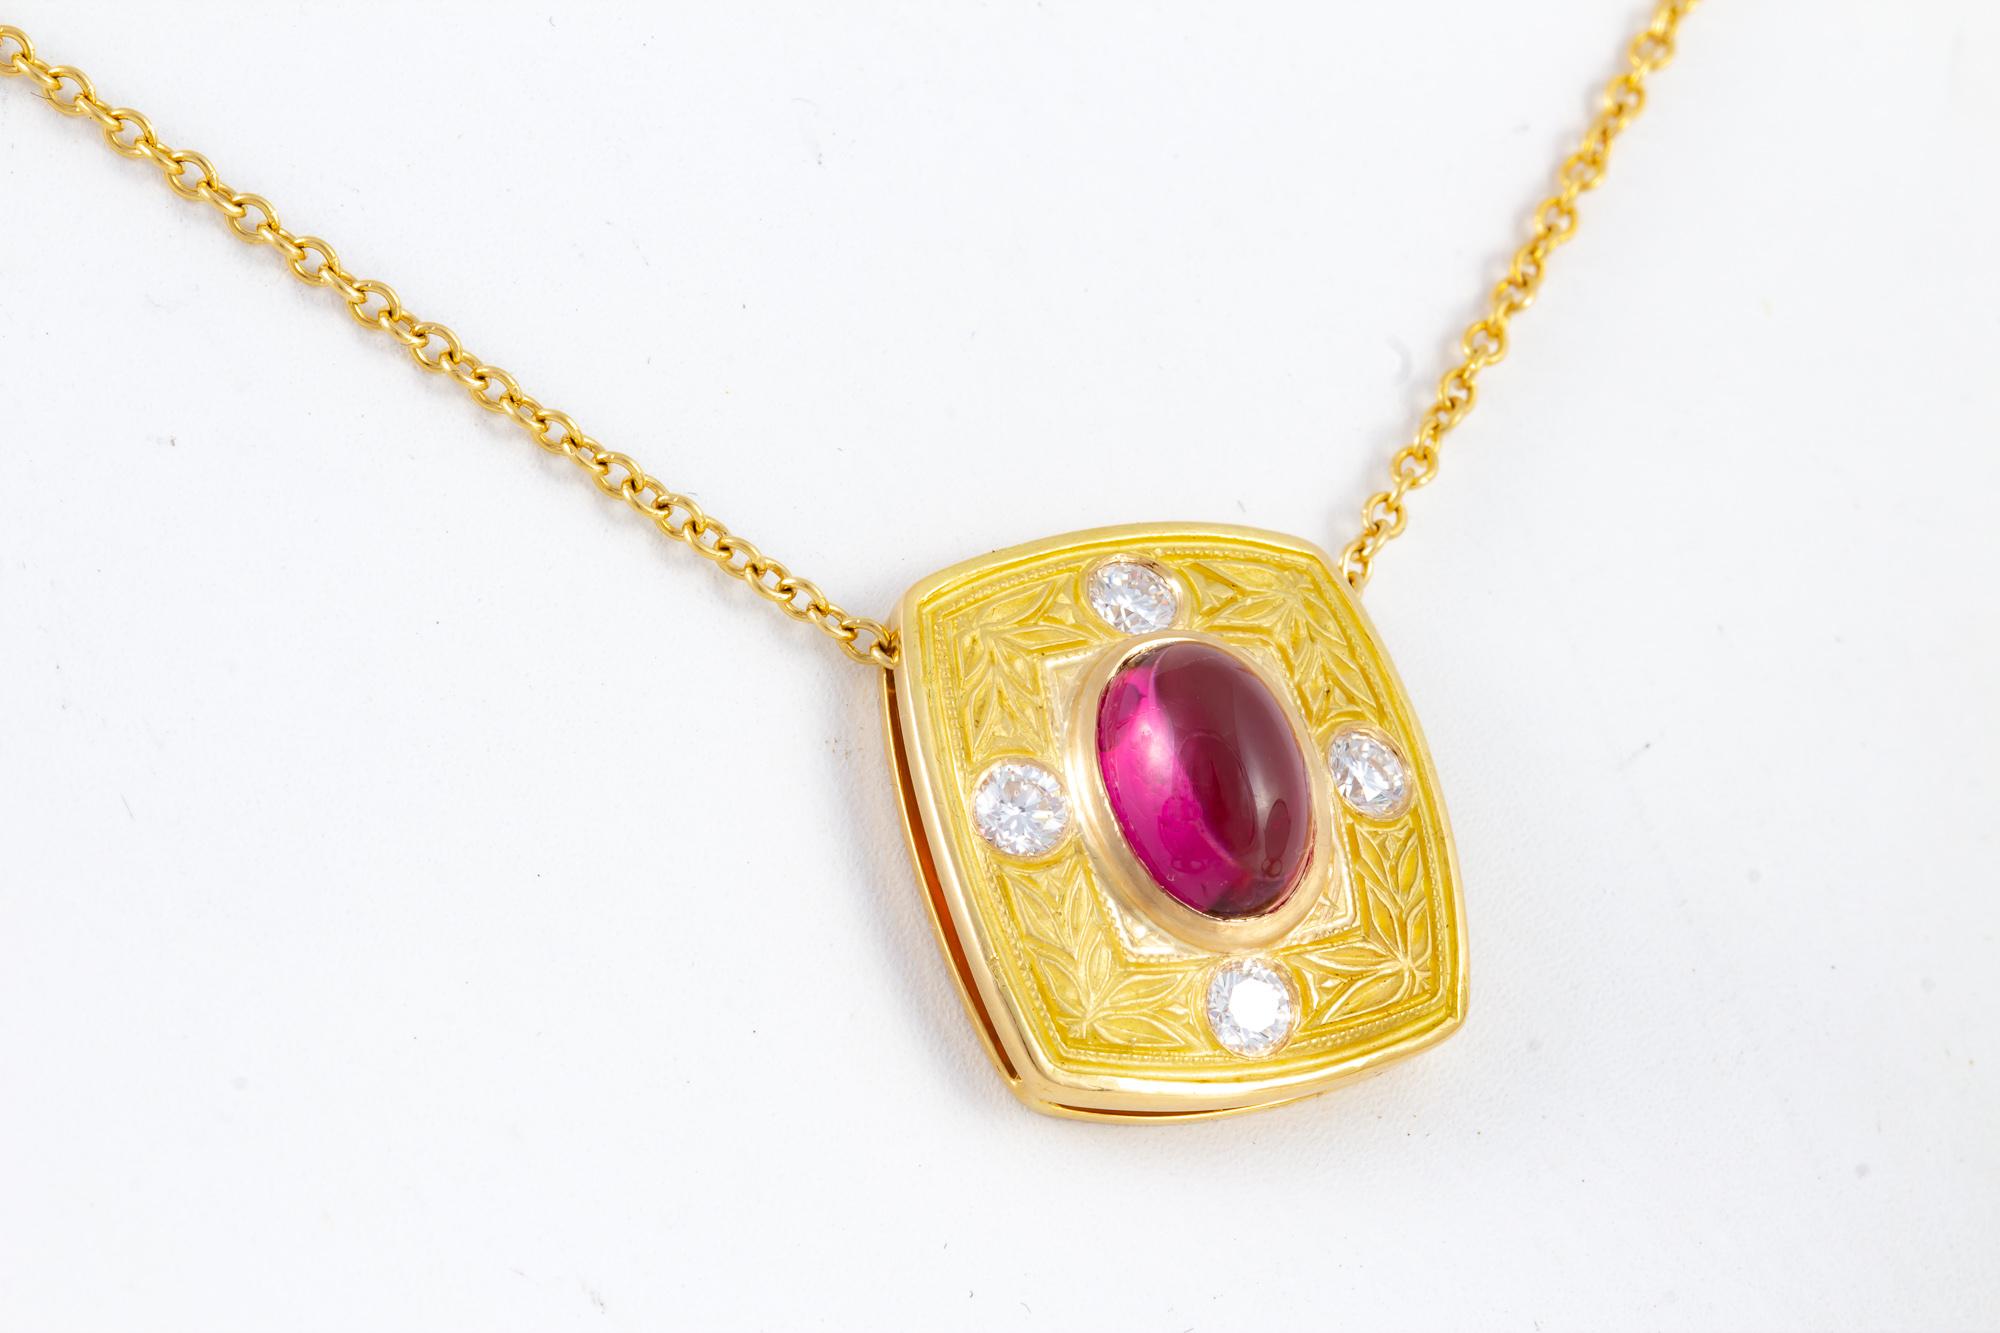 Handcrafted by a master jeweler, this exquisite Rubellite Tourmaline is set in a beautifully hand engraved setting in yellow 18 kt gold.  The center stone is 4.20 carats, surrounded by .40 carats of diamonds.  Handcrafted in the United States by a